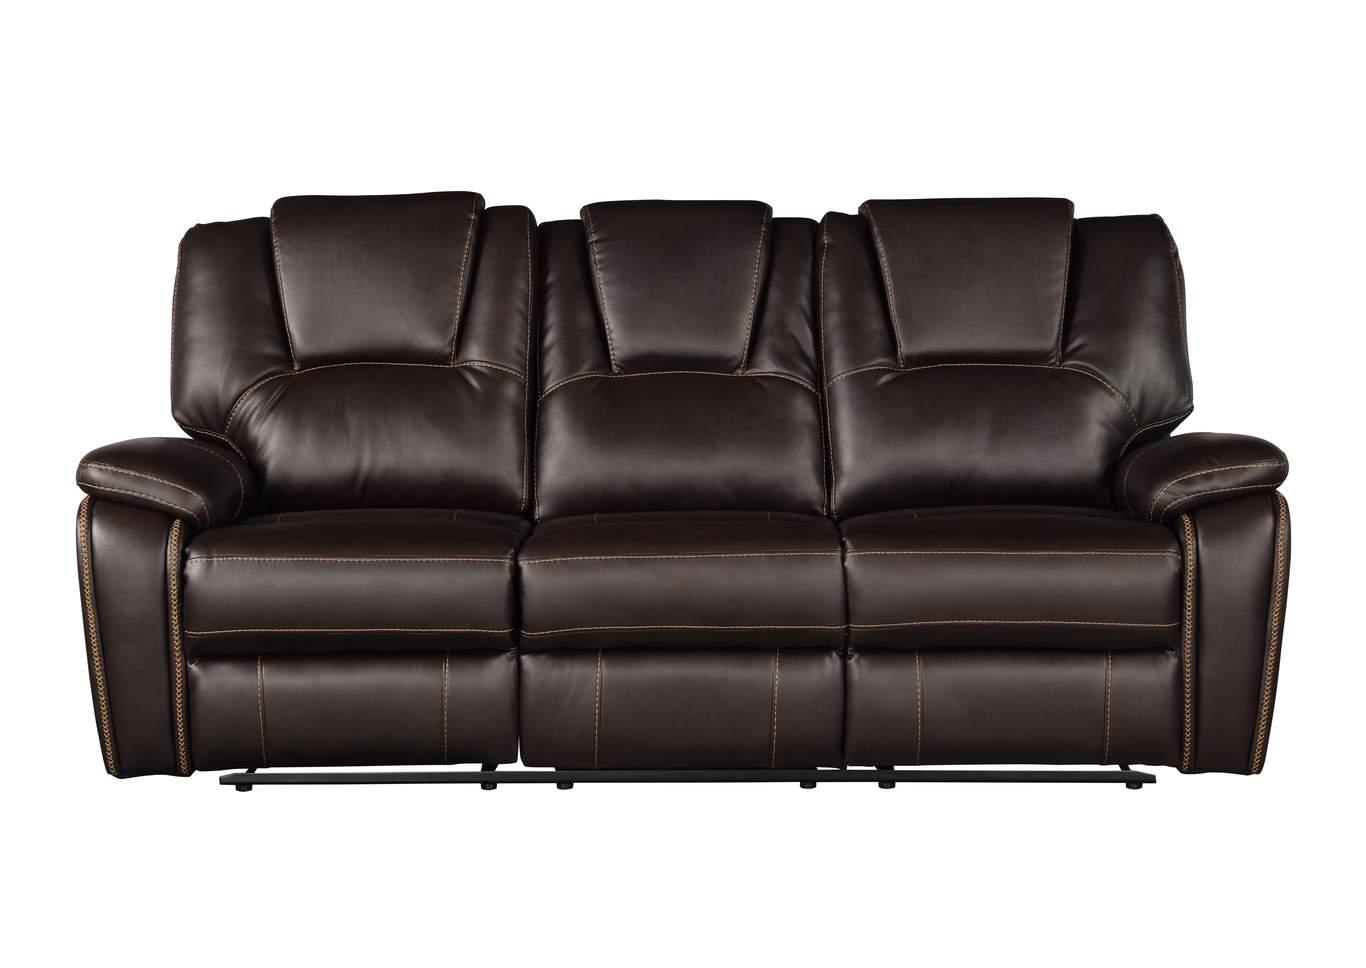 Contemporary, Modern Recliner Sofa Hongkong GHF-733569214310 in Brown Eco Leather